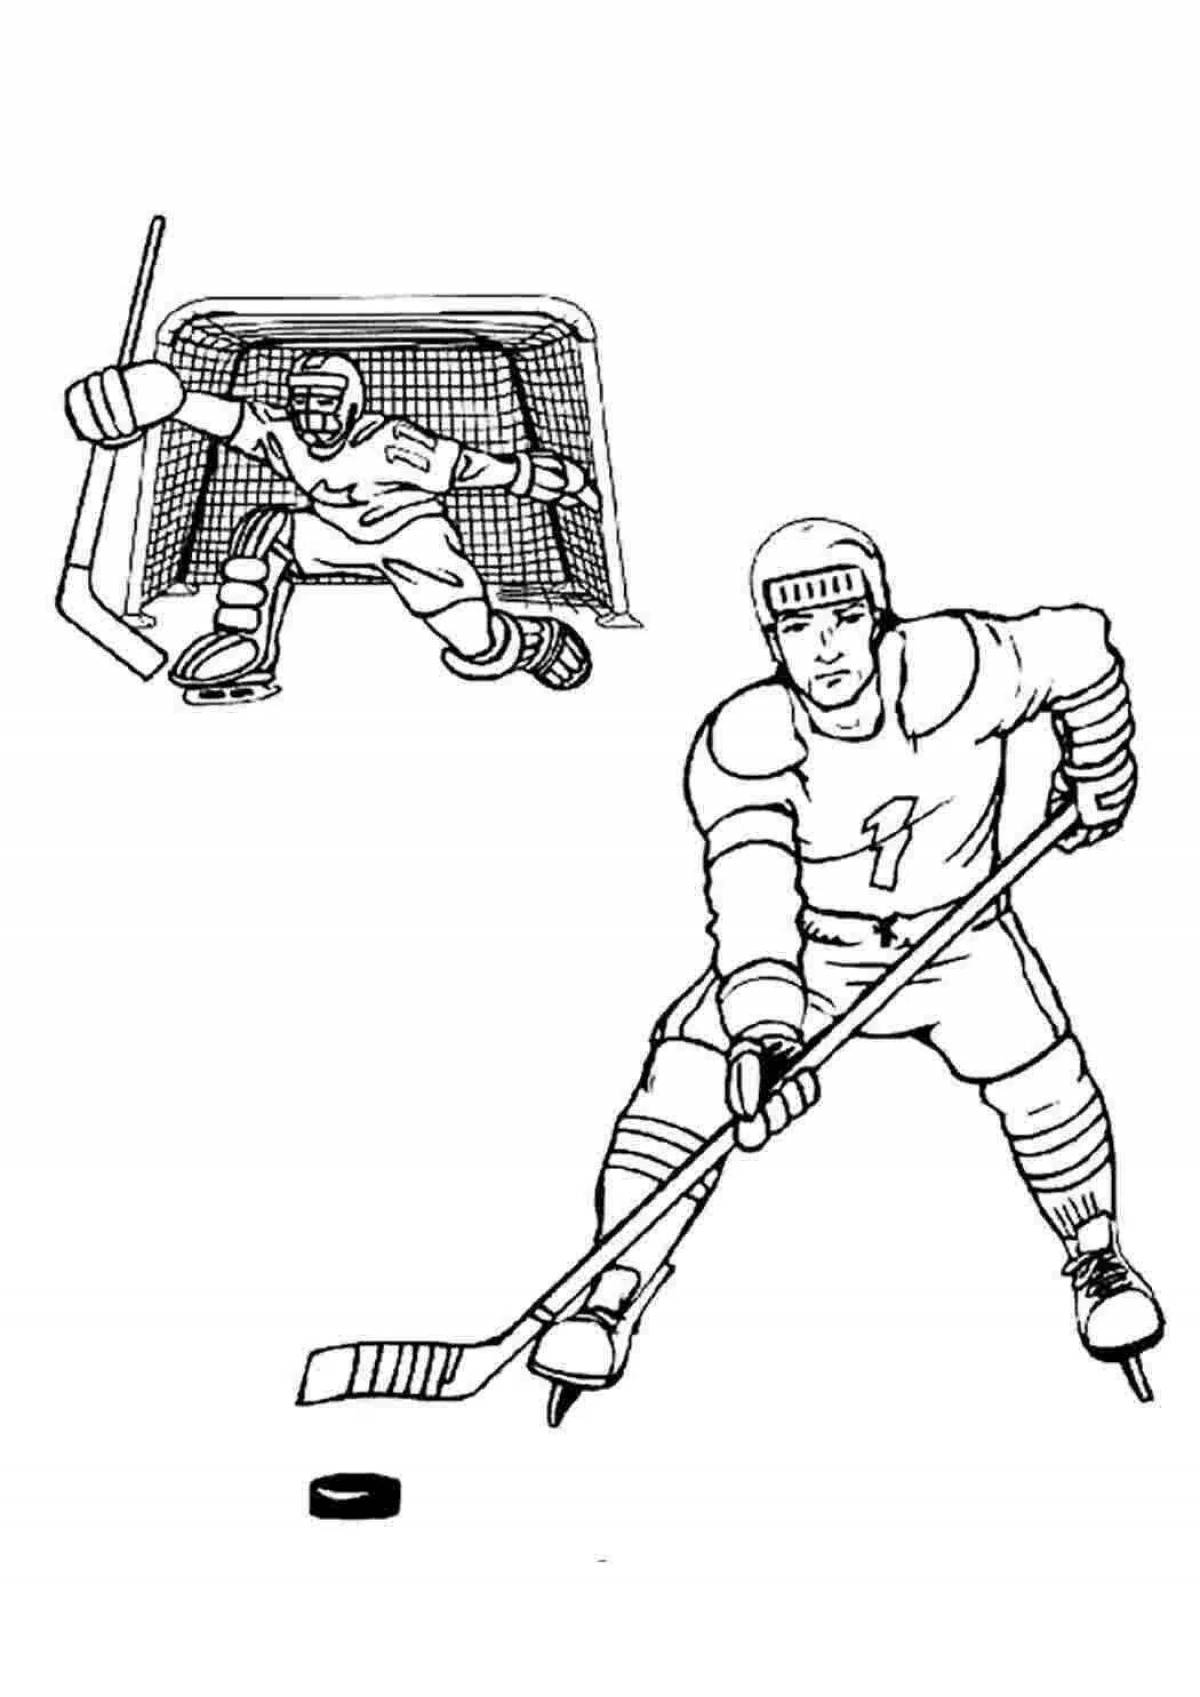 Coloring book gorgeous ovechkin